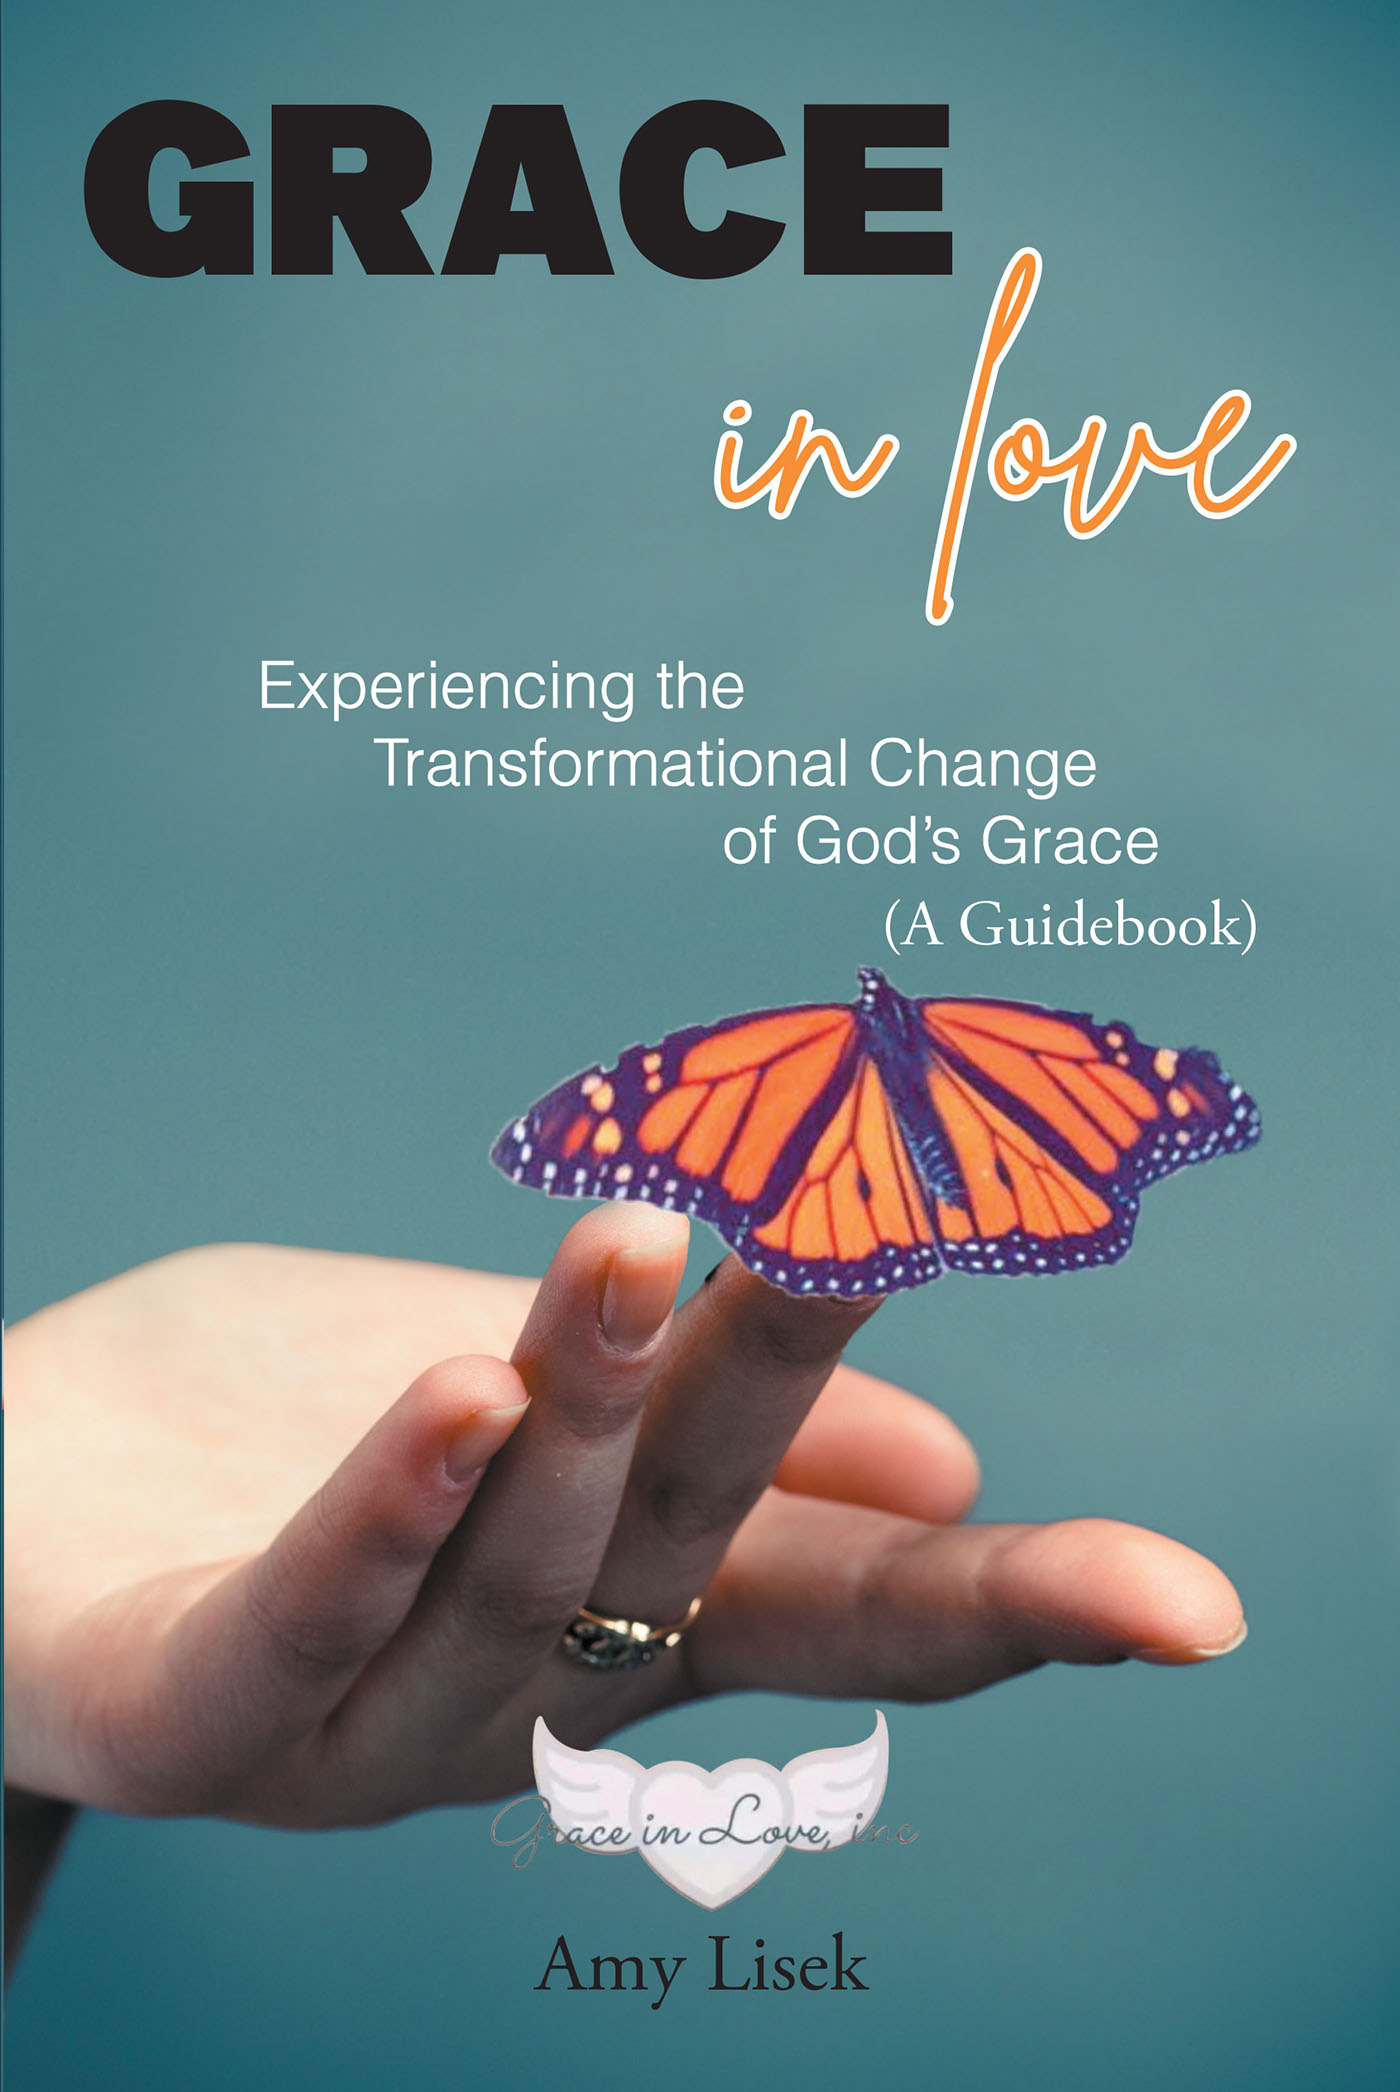 Amy Lisek’s Newly Released “Grace In Love: Experiencing the Transformational Change of God’s Grace (A Guidebook)” is an Empowering Chance for Growth